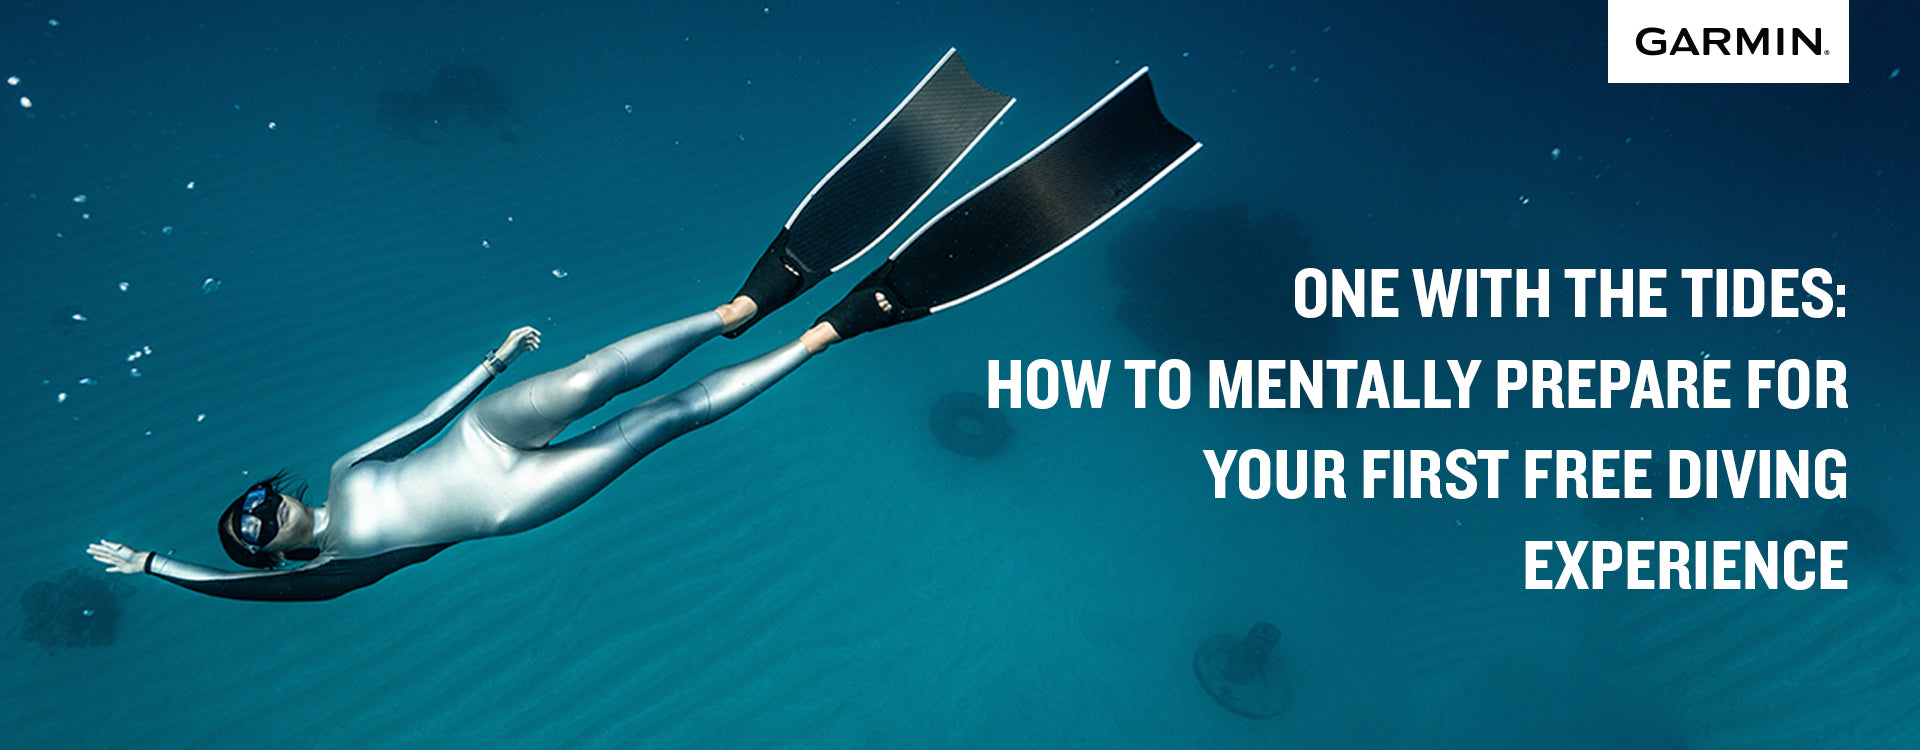 One with the Tides: How to Mentally Prepare for Your First Freediving Experience